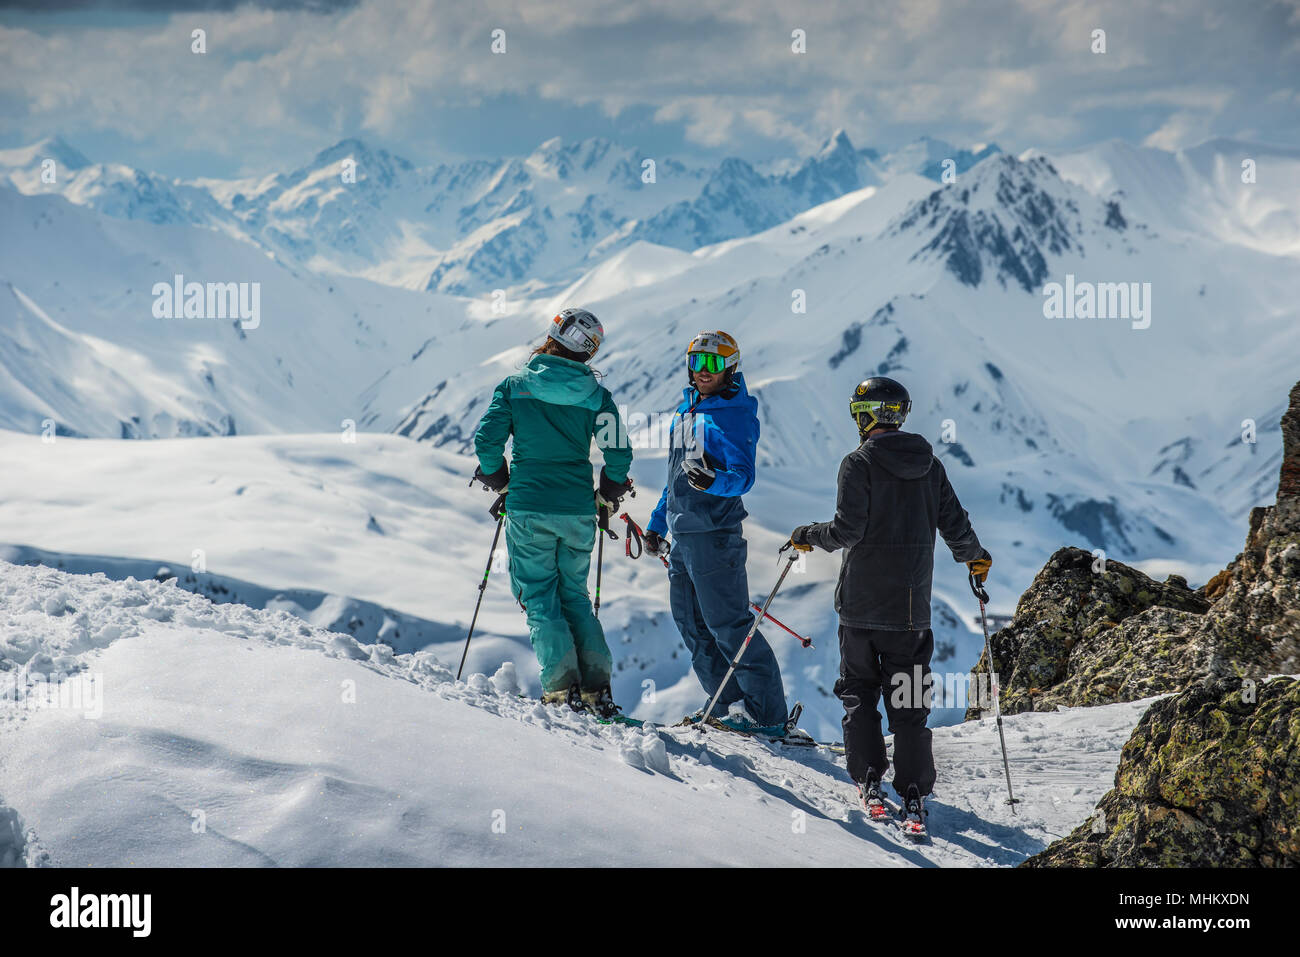 A ski instructor talks to a male and female skier at altitude in the French alpine resort of Courchevel. Stock Photo